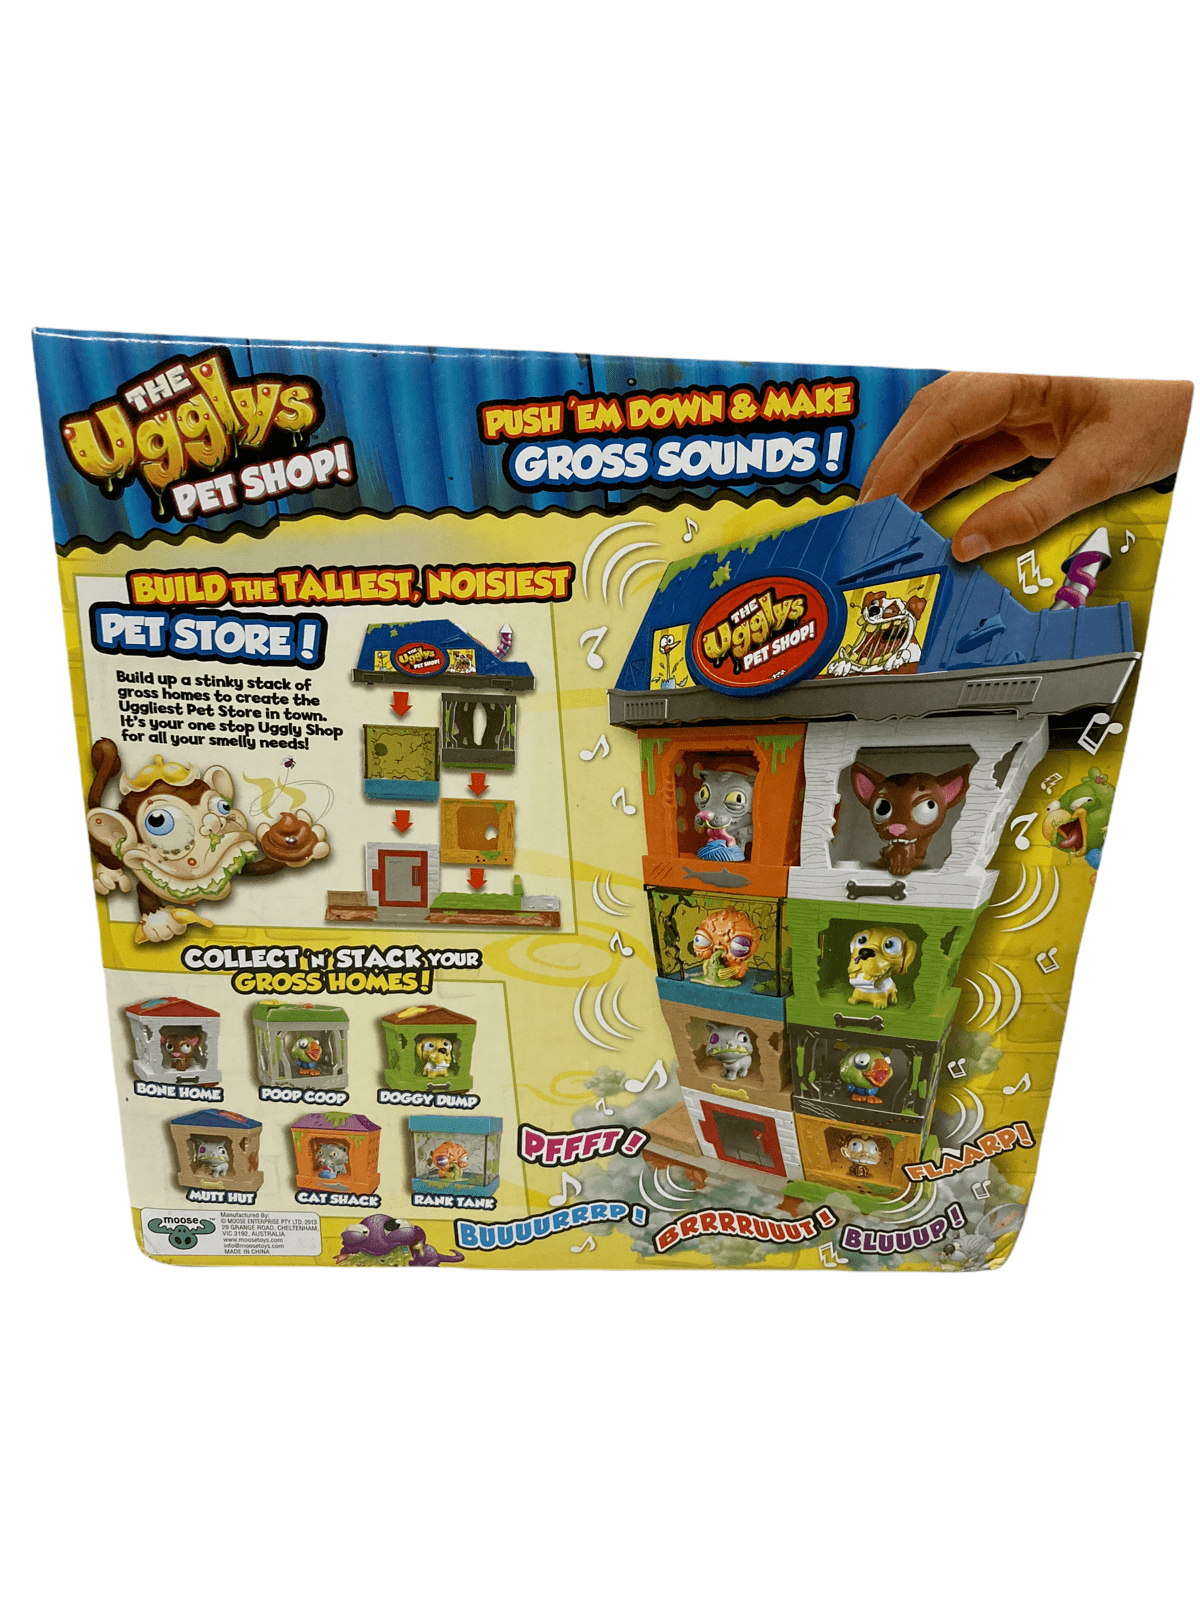 New The Ugglys Pet Shop Pet Store Stack Your Gross Homes Exclusive Manic Monkey 